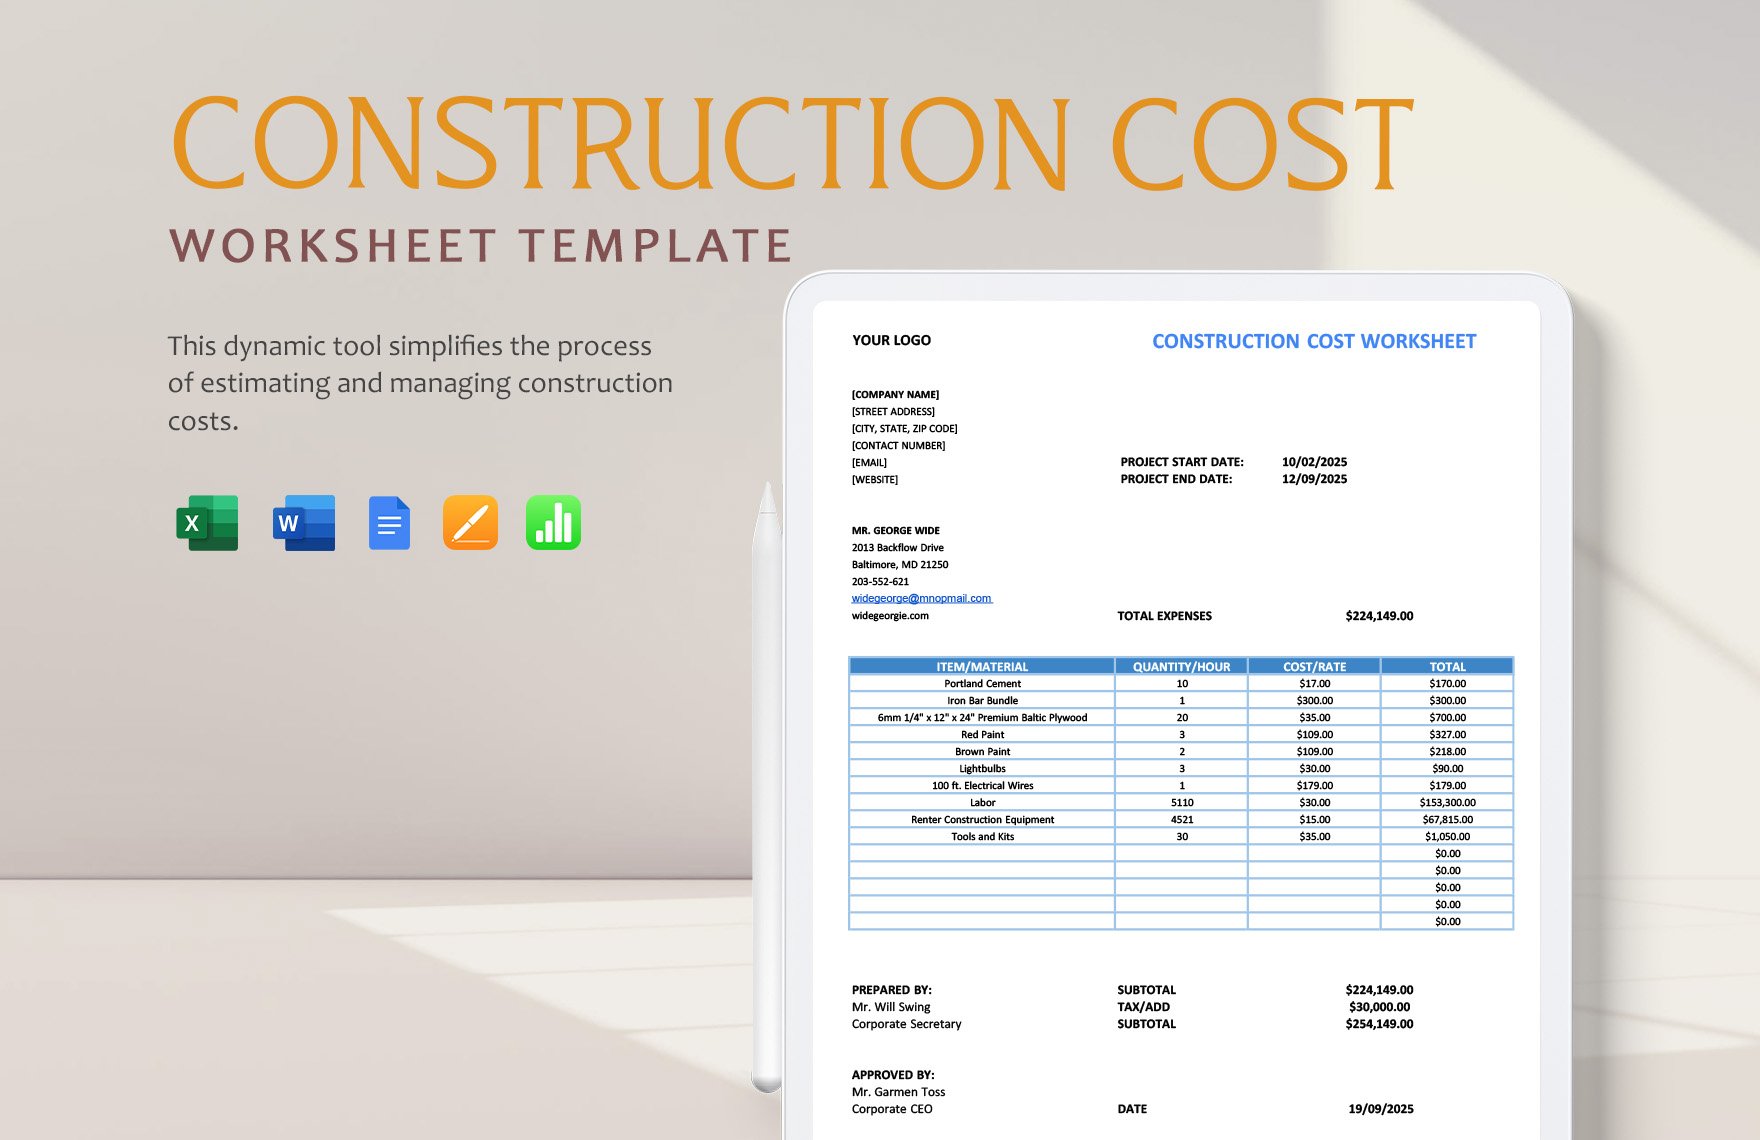 Free Construction Cost Worksheet Template in Word, Google Docs, Excel, Apple Pages, Apple Numbers